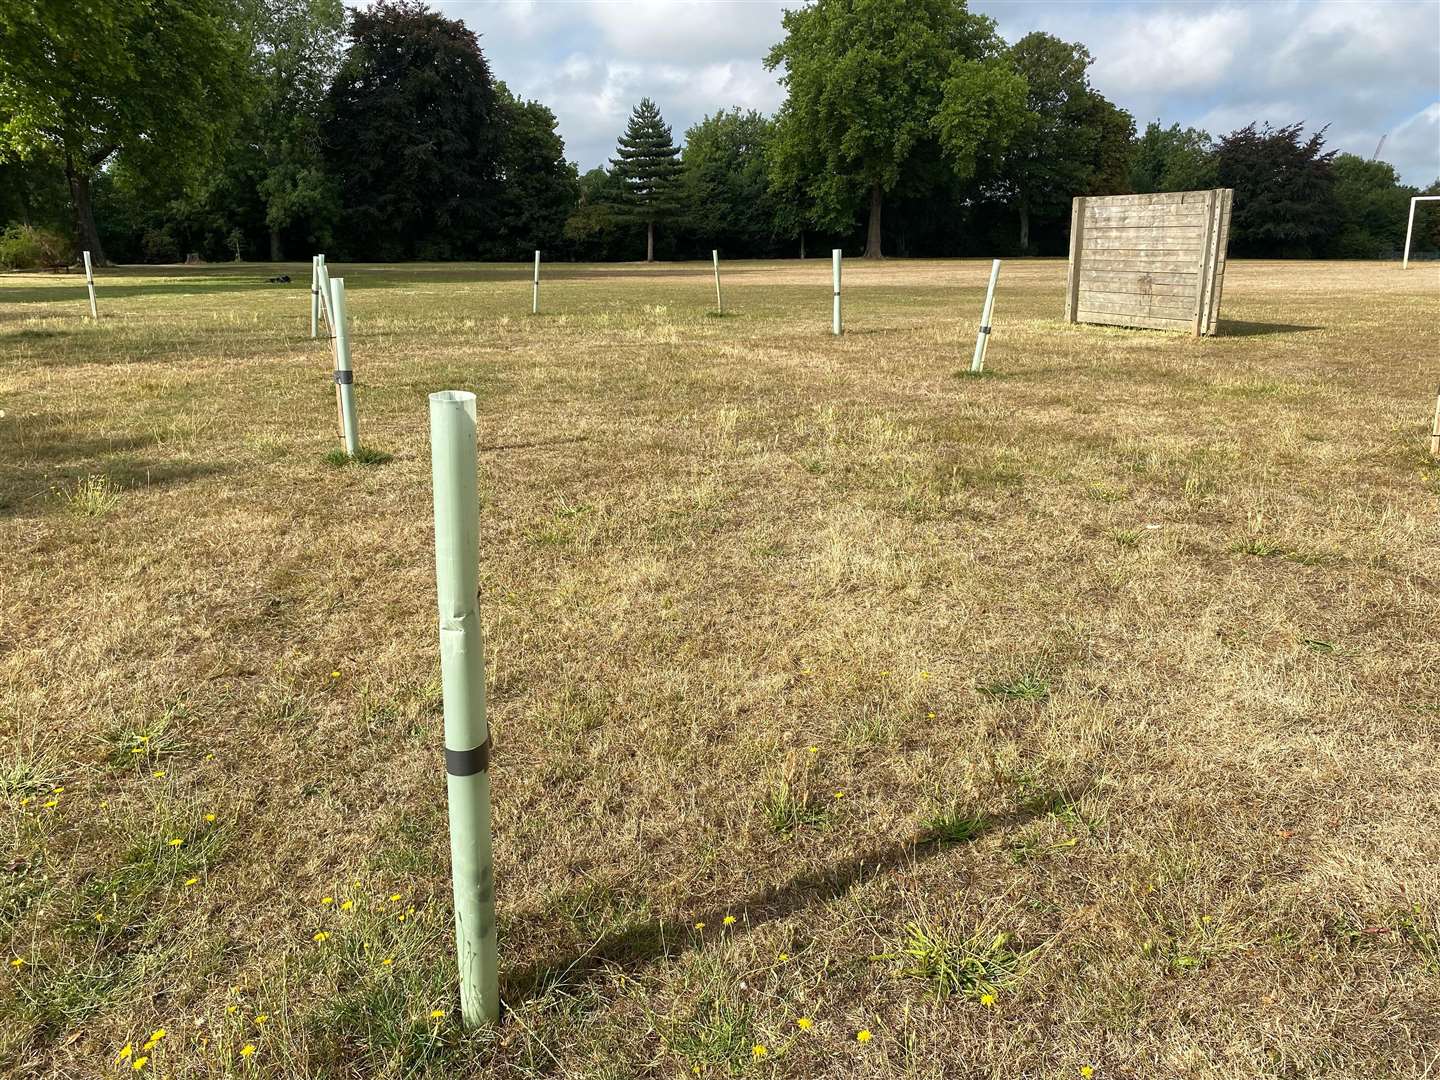 Tree whips planted at Rainham Recreation Ground have struggled with drought and vandalism. Images: Stuart Bourne